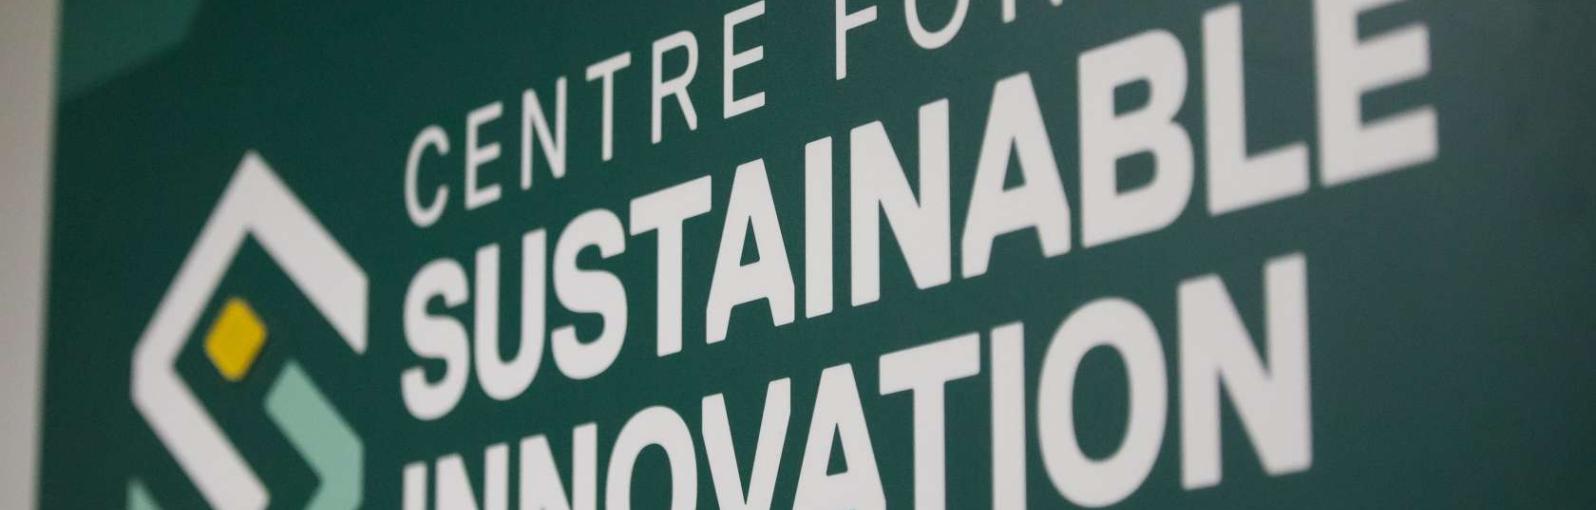 Center for Sustainable Innovation logo wall art